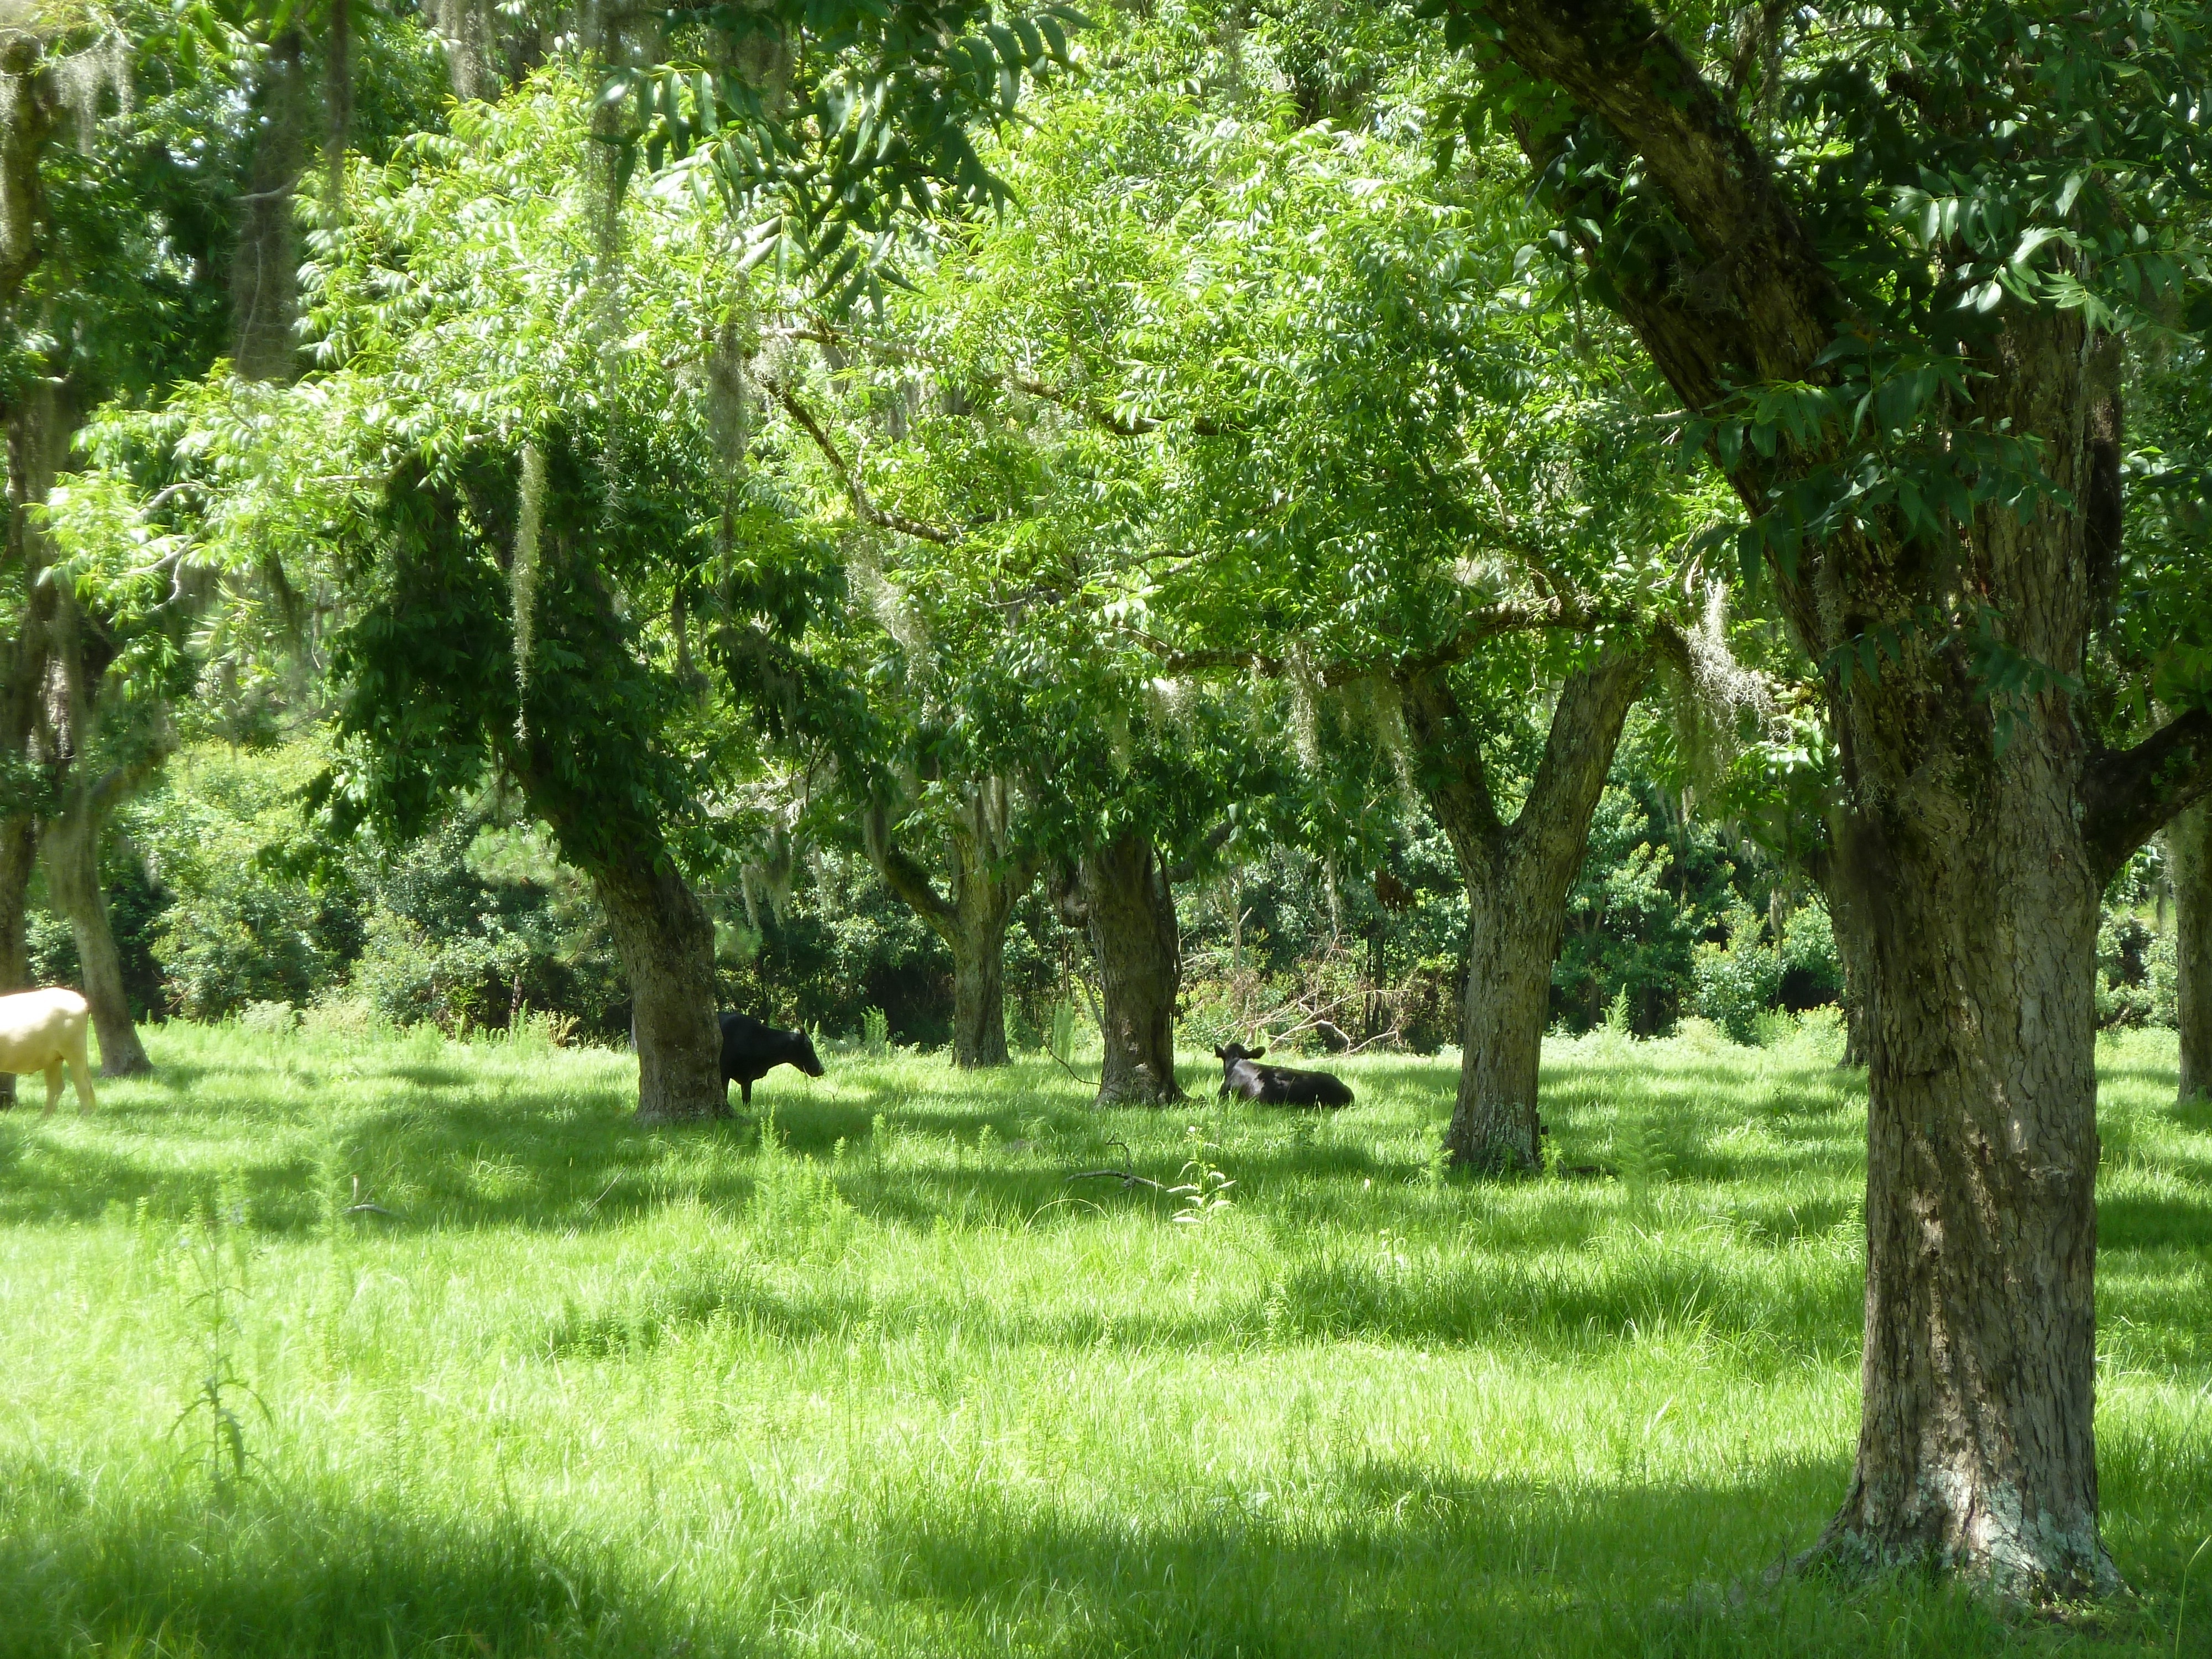 Organic, Tree, Agriculture, Outdoors, tree, grass